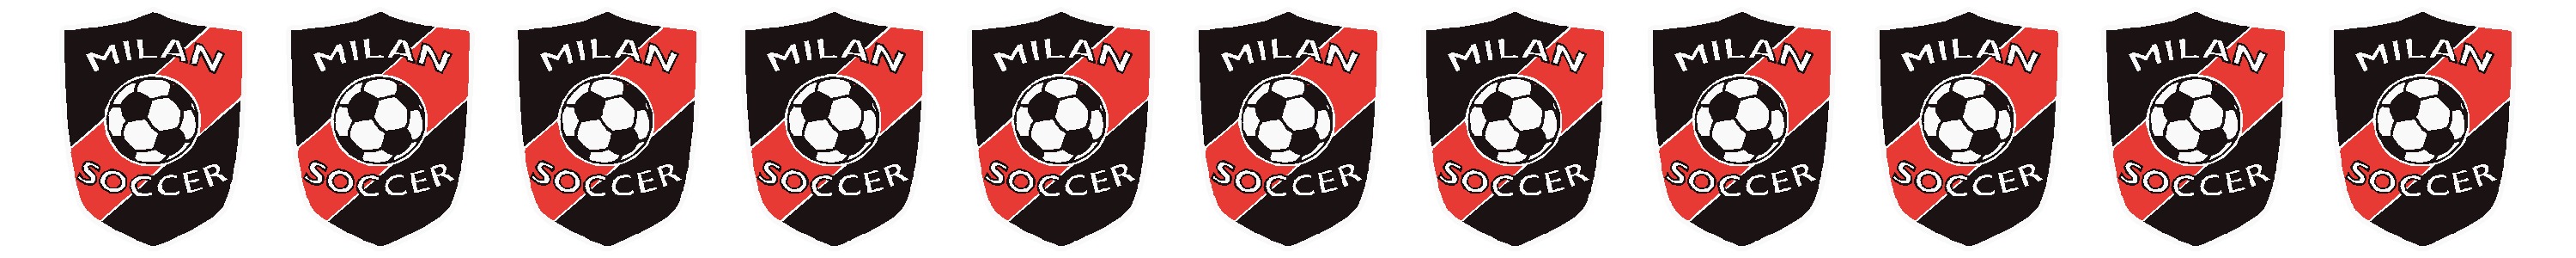 images/Milan Youth Soccer Group.gif